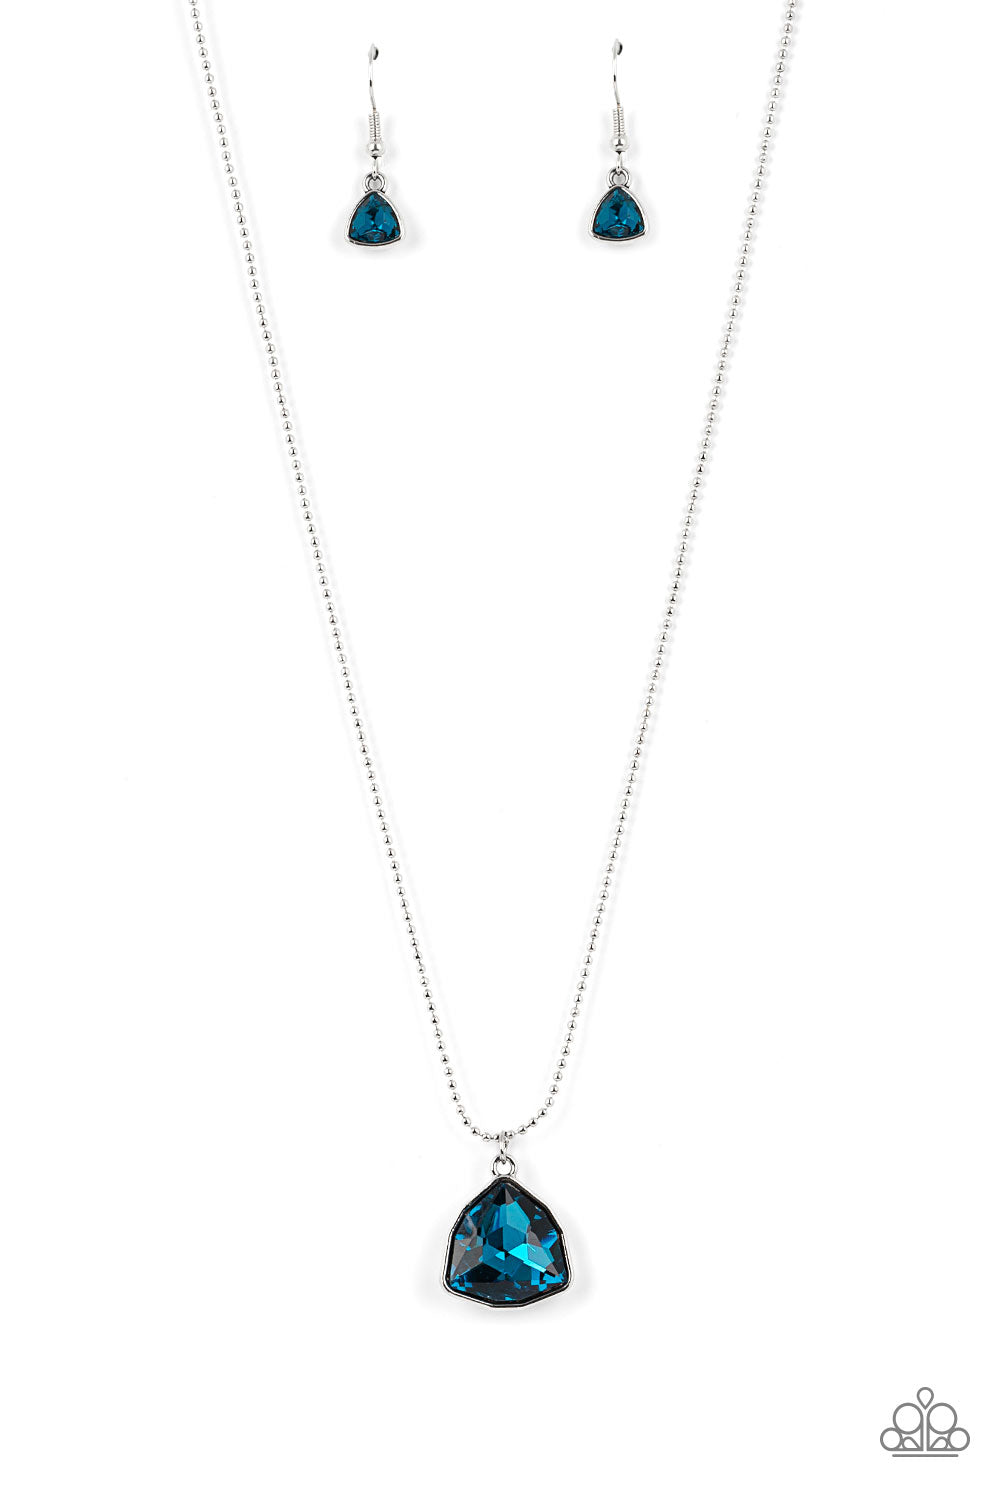 Galactic Duchess - Blue Rhinestone Necklaces faceted asymmetrical blue gem is encased in a sleek silver frame at the bottom of a silver popcorn chain, creating a stellar pendant below the collar. Features an adjustable clasp closure.  Sold as one individual necklace. Includes one pair of matching earrings.